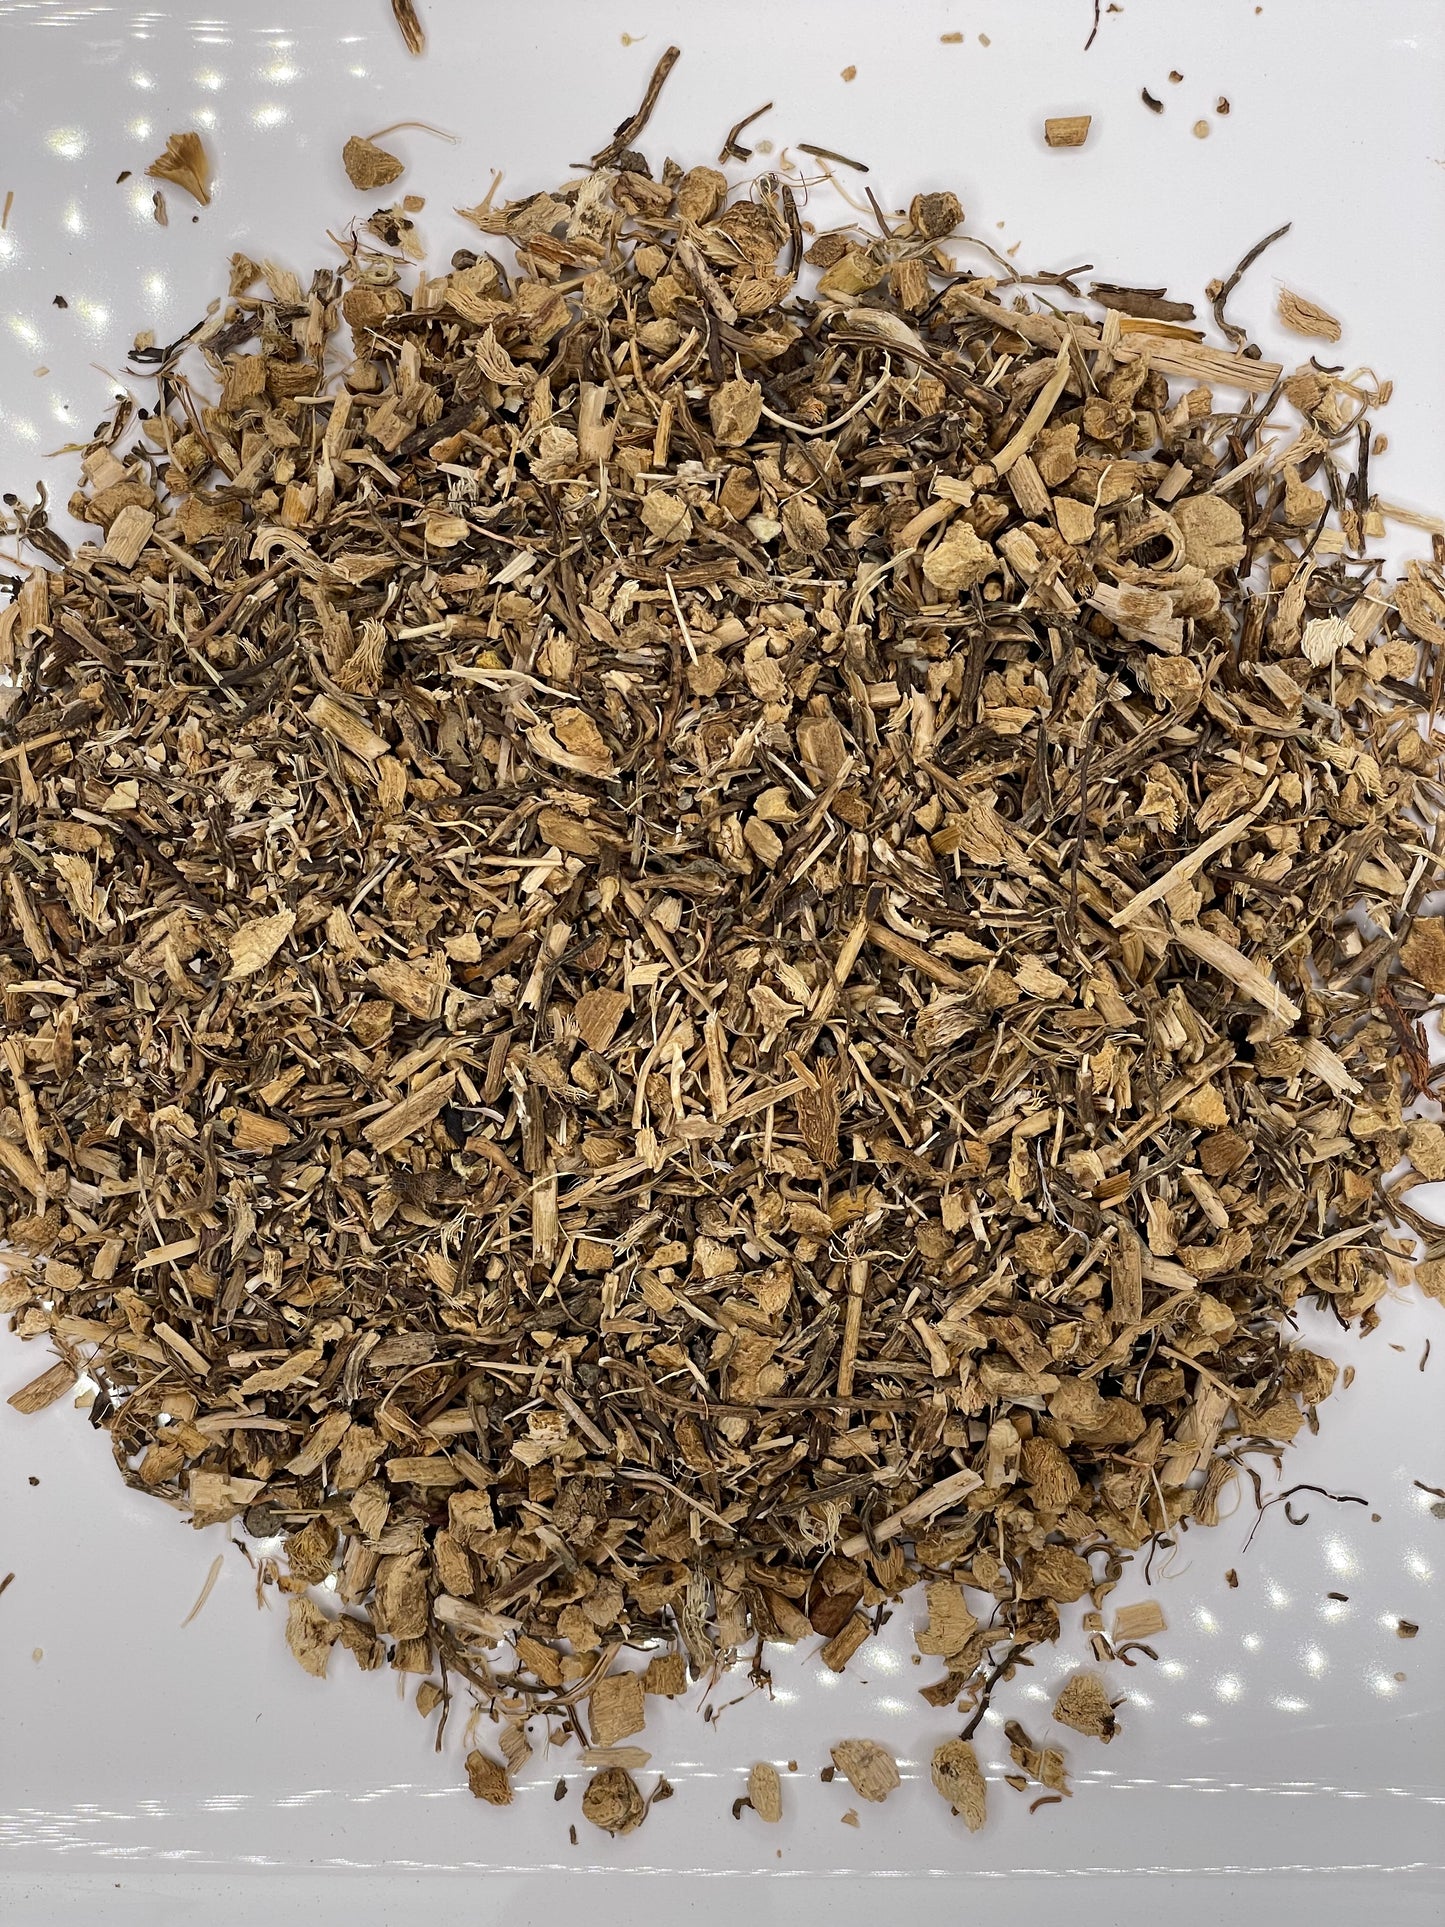 Witchy Pooh's Butcher's Broom Root Dried Strengthen Psychic Abilities